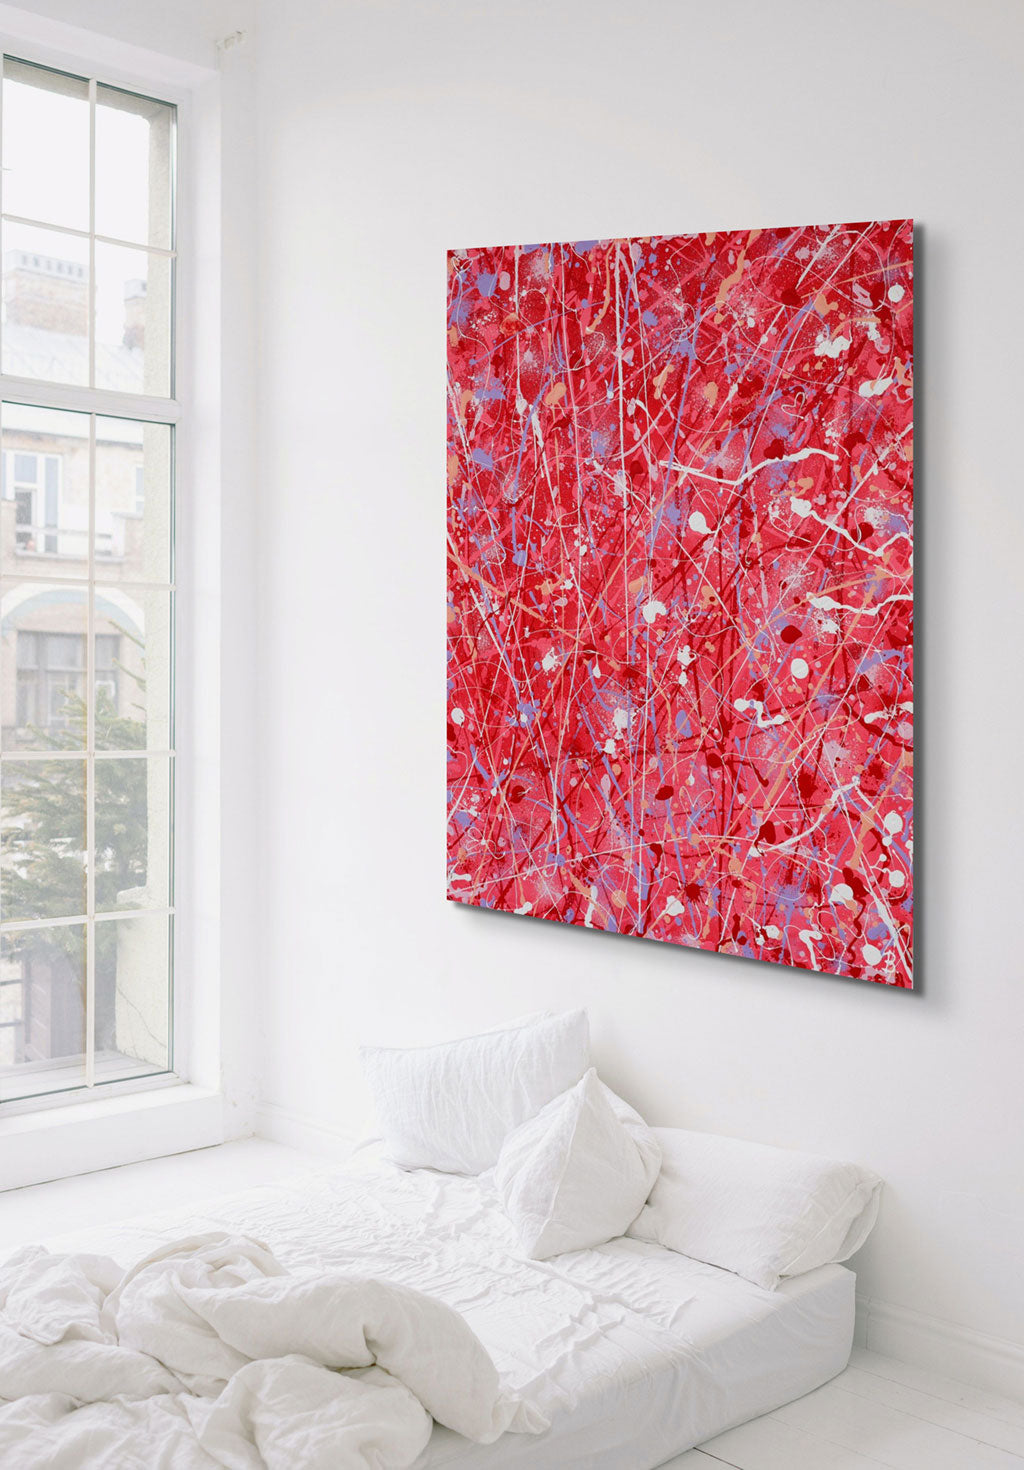 'Passsion' original Abstract painting unframed hanging in a white bedroom. Pianed on canvas by Abstract Expressionist Artist, Bridget Bradley